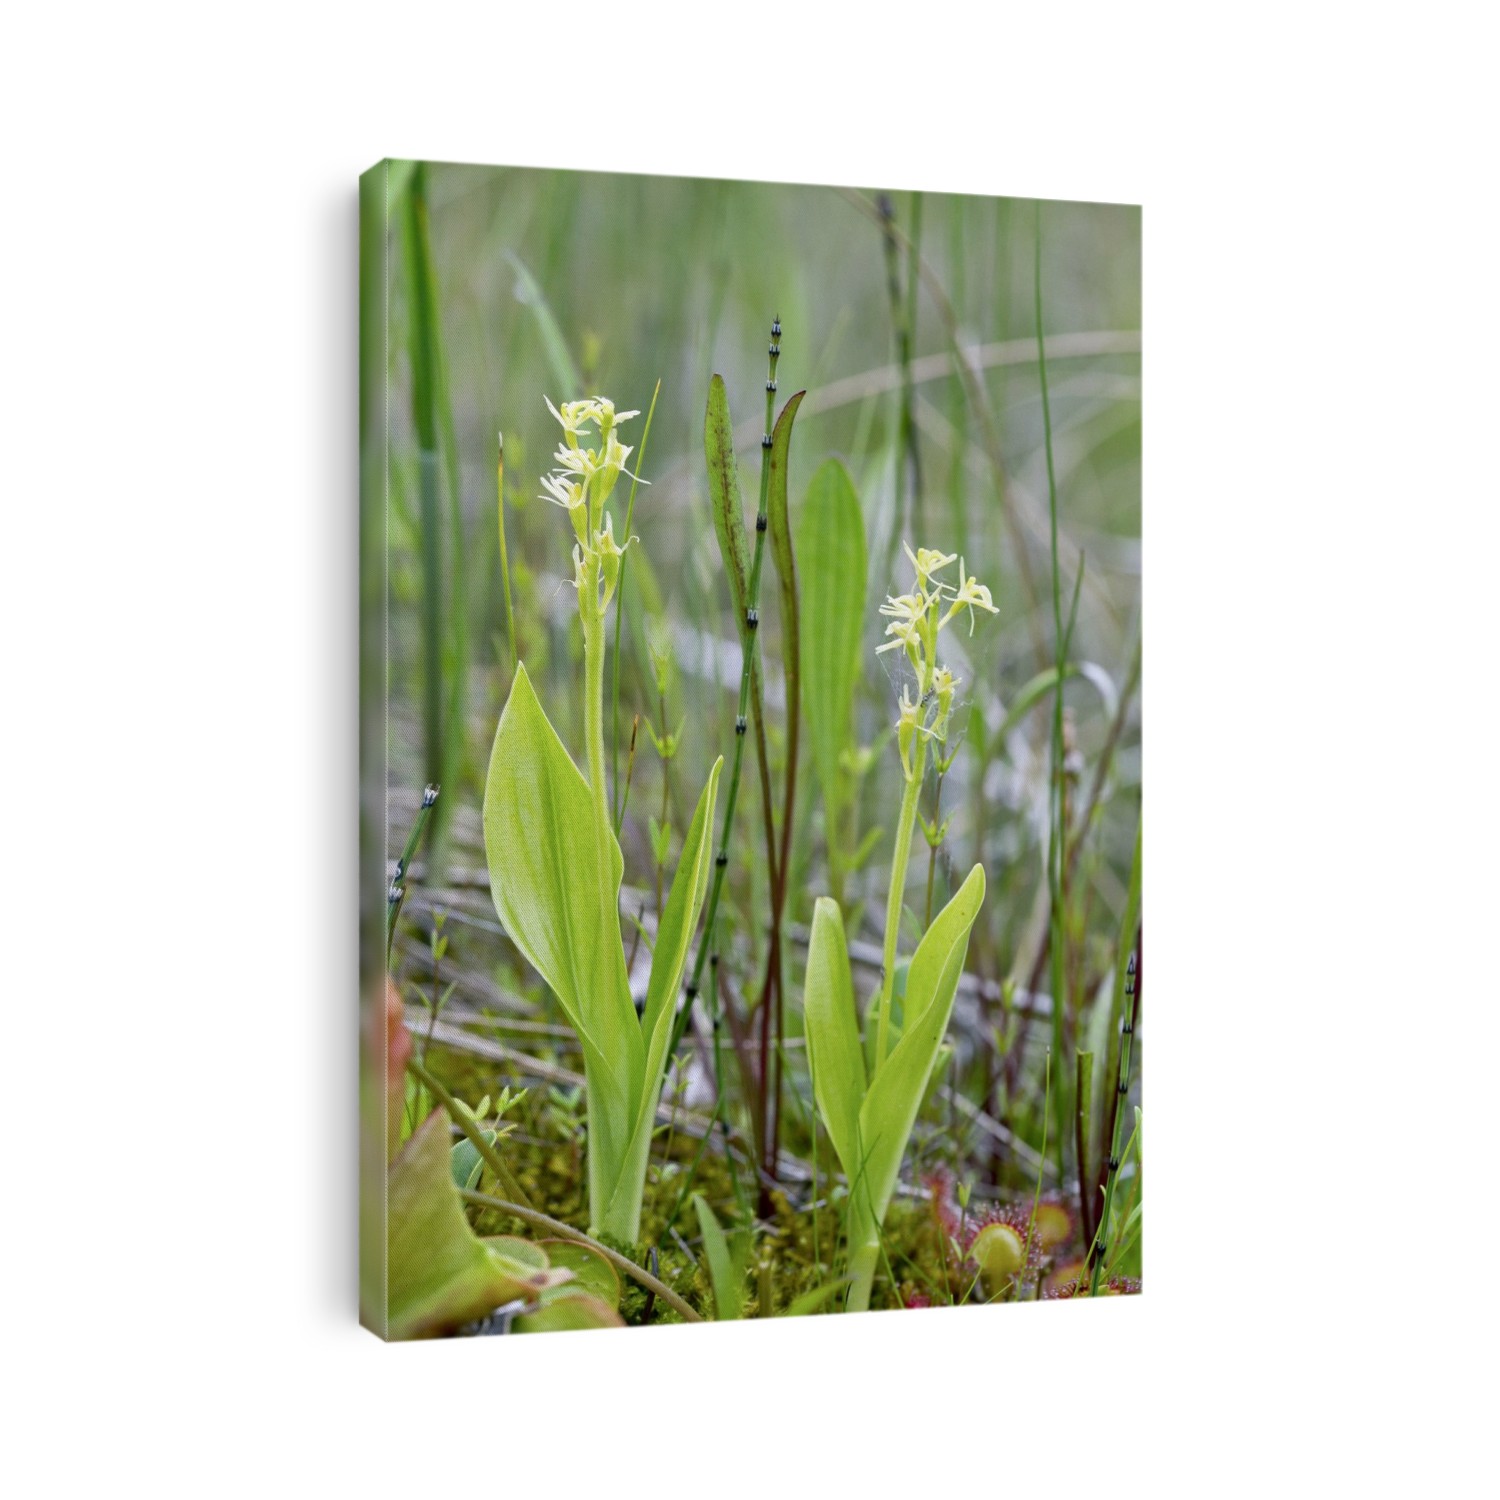 Fen orchid (Liparis loeselii) in flower. Photographed in Canada.